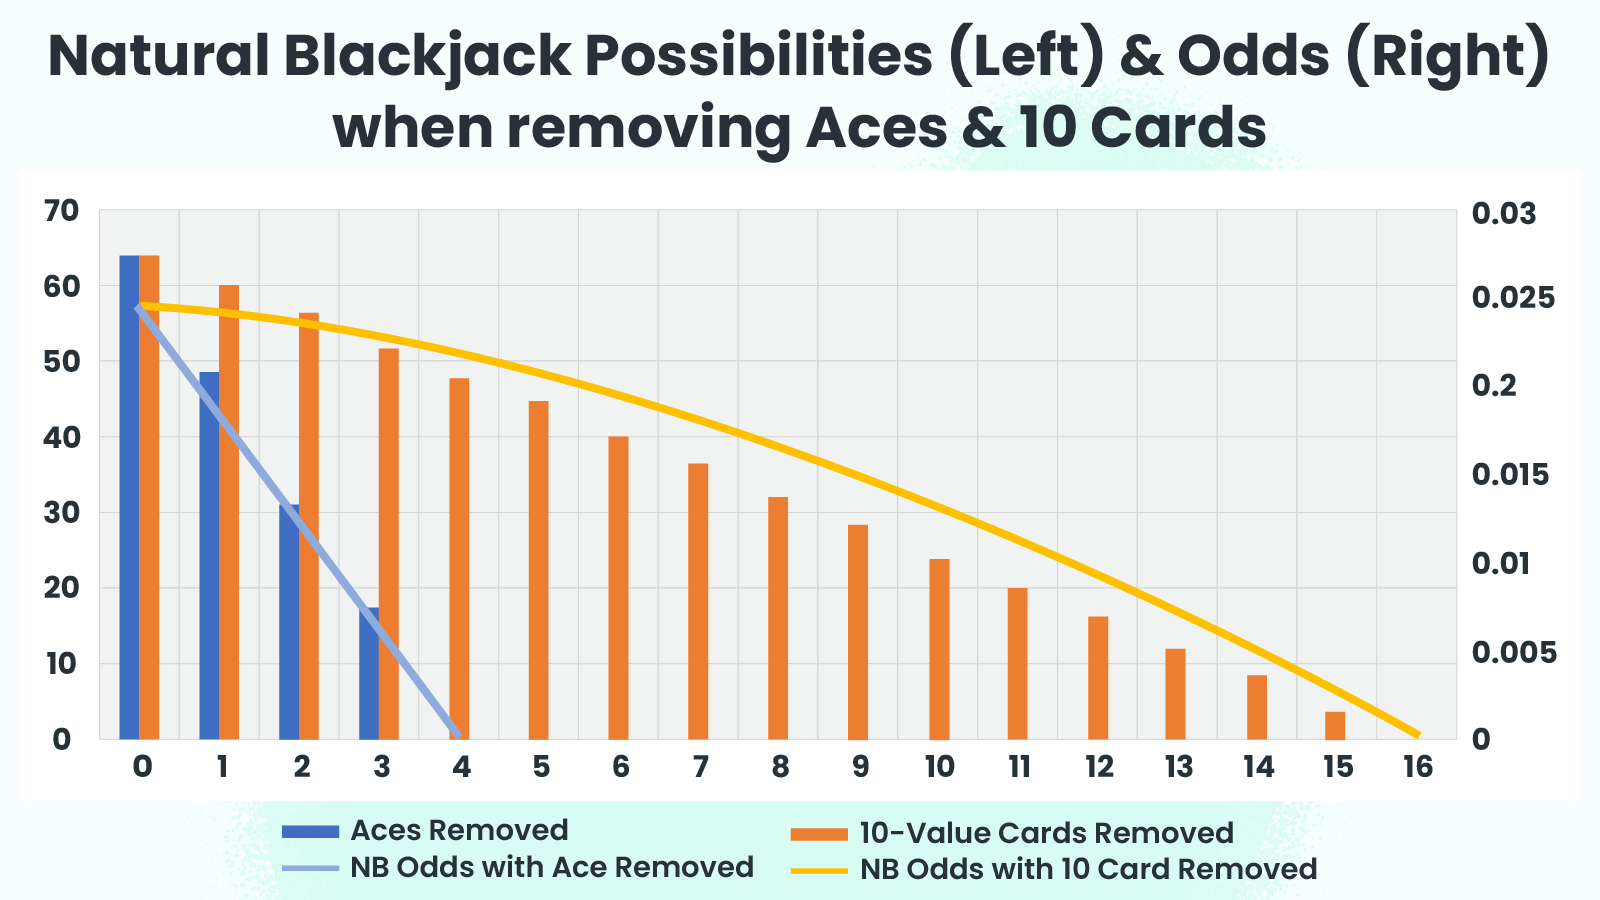 Natural Blackjack Possibilities (Left) & Odds (Right) When Removing Aces & 10 Cards